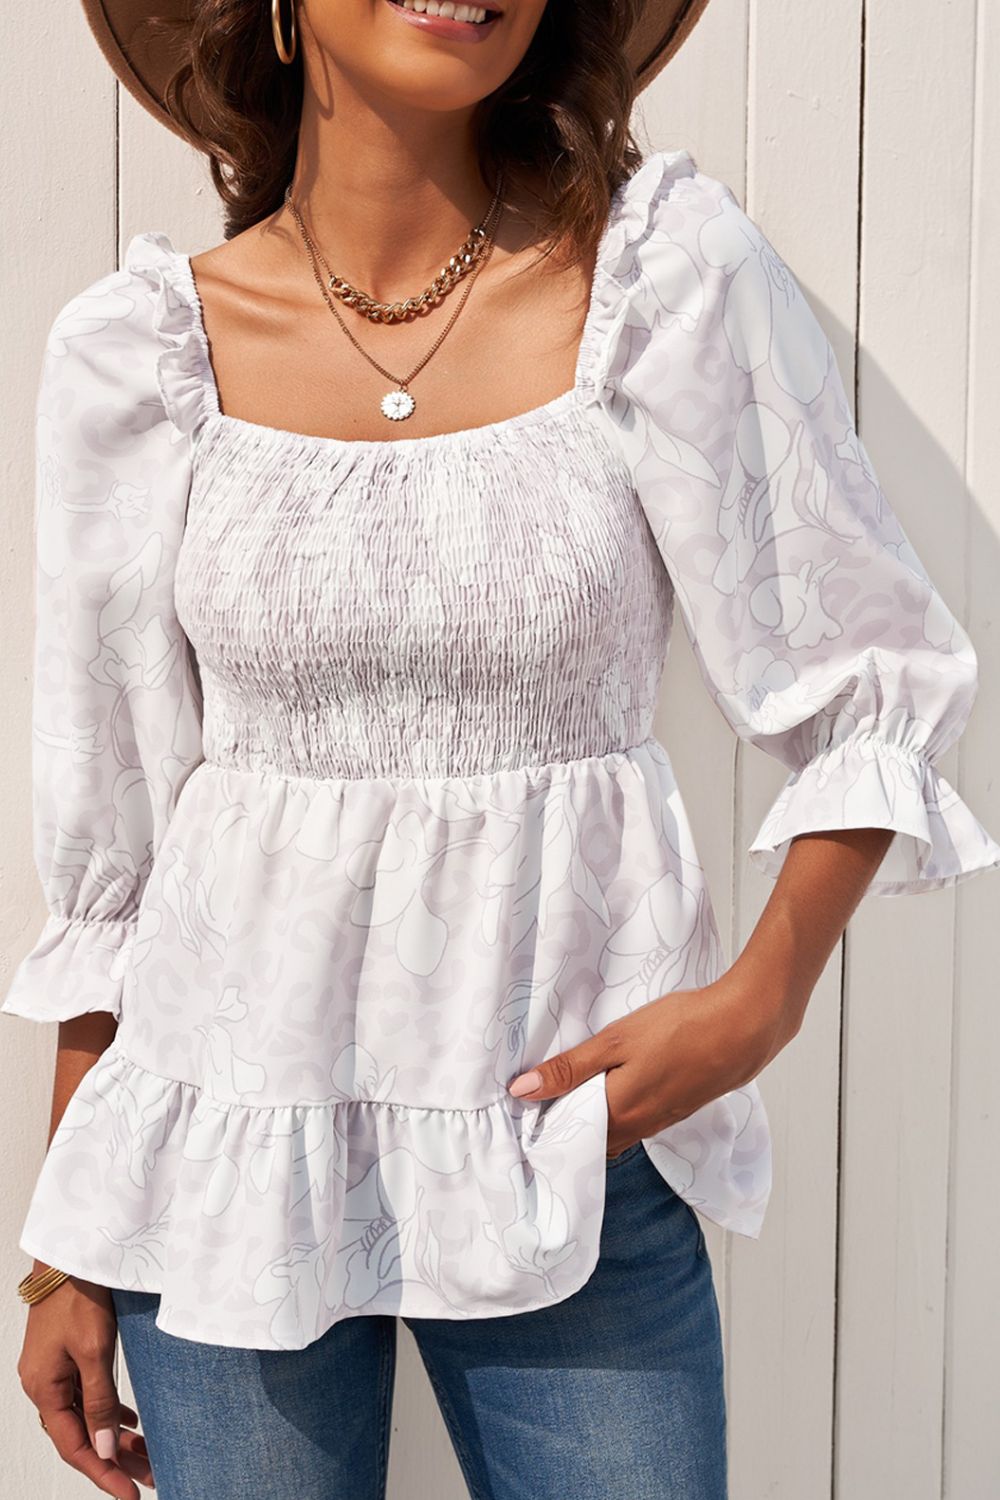 Women's Floral Smocked Ruffled Babydoll Top